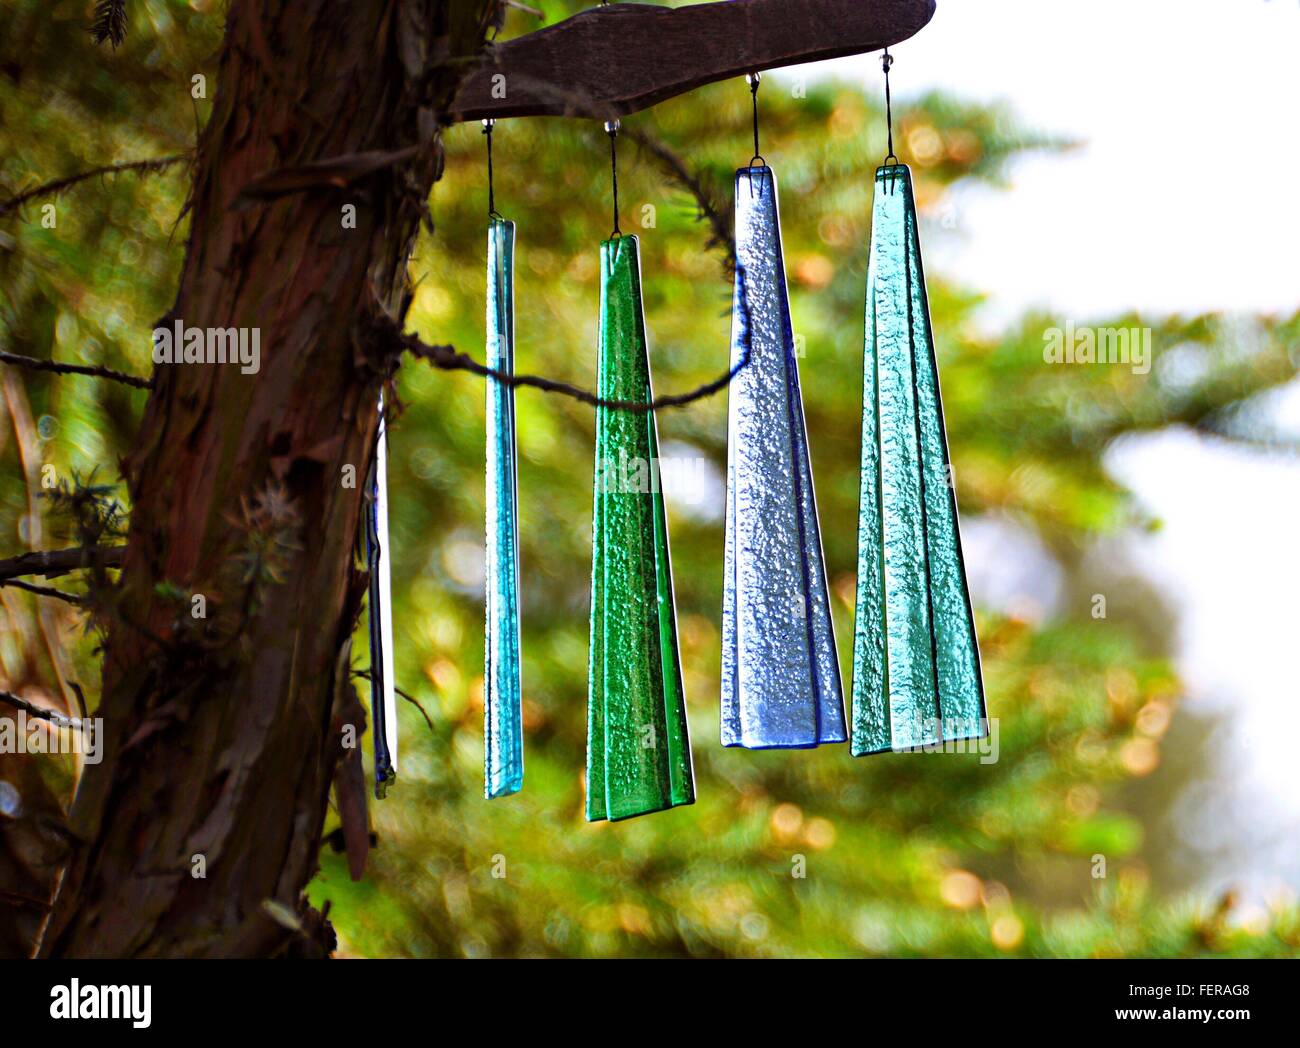 Multi Colored Wind Chimes Hanging From Tree Stock Photo